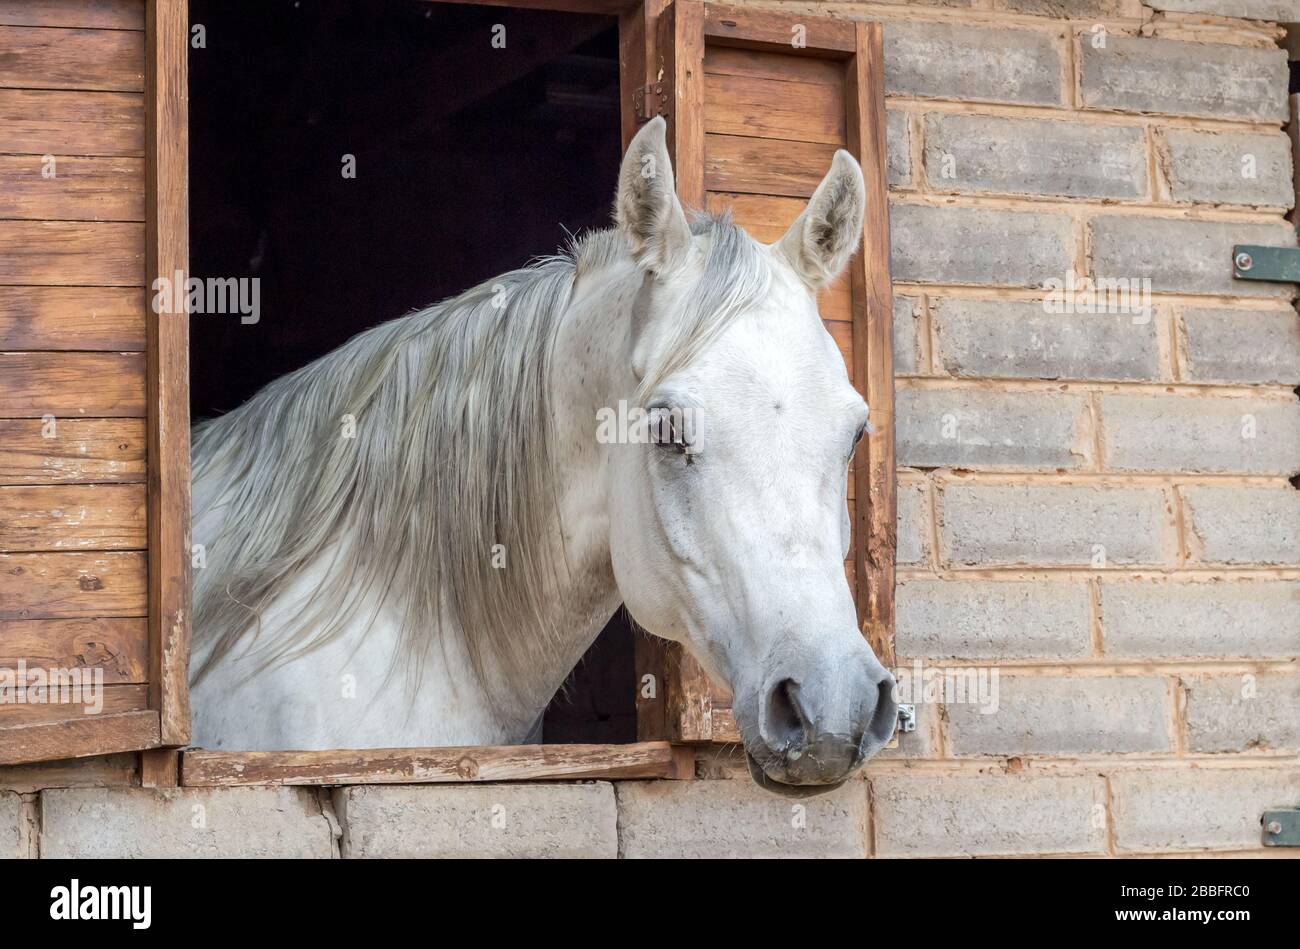 Beautiful Arabian horse looking out of stall window at brick stable - Arabian horse portrait Stock Photo